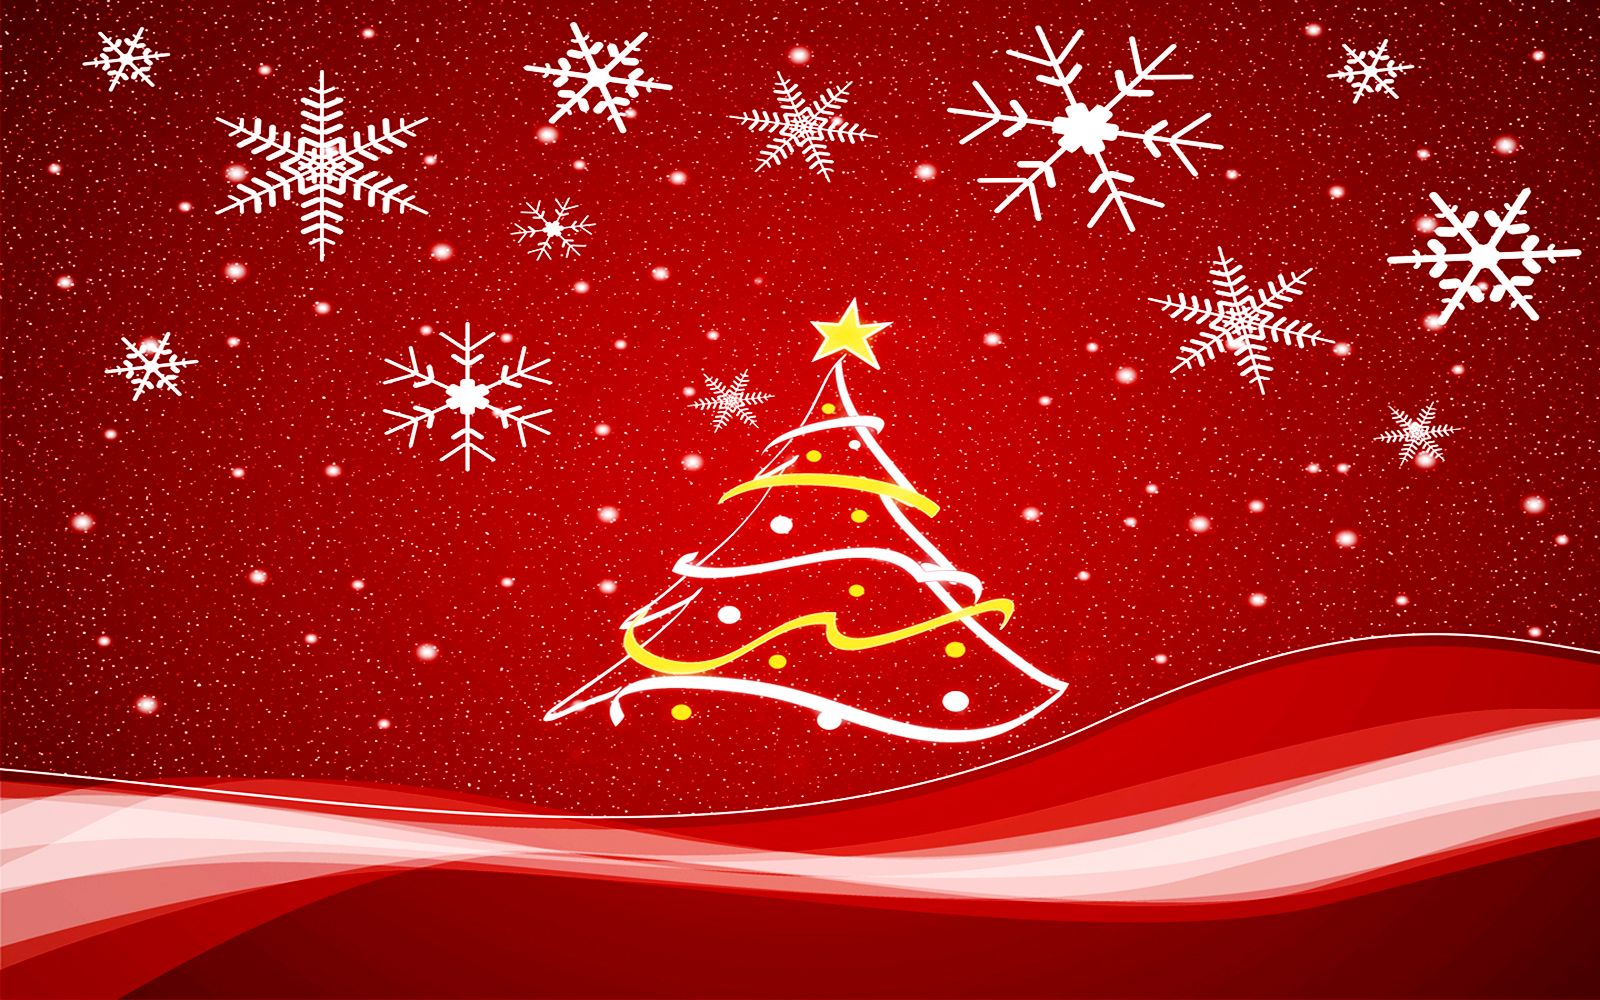 Central Wallpaper: Christmas Tree HD Wallpapers